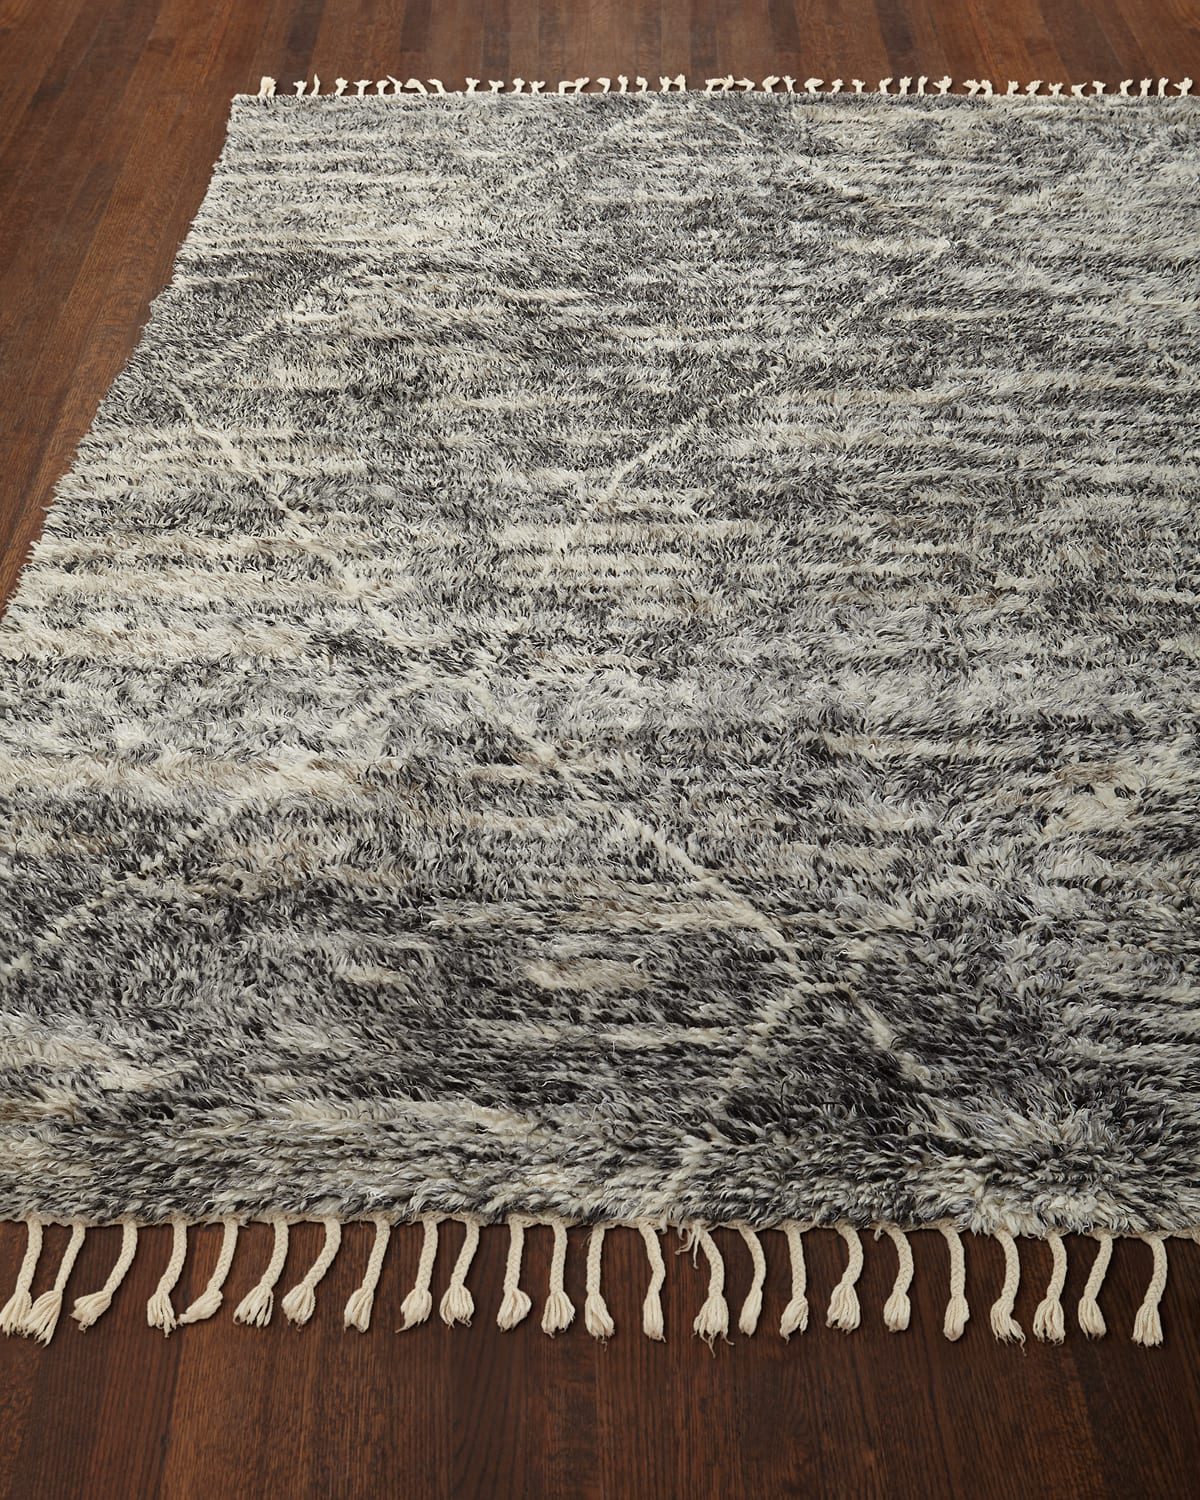 Reanna Hand-Knotted Shag Rug, 6' x 8' at RugsBySize.com